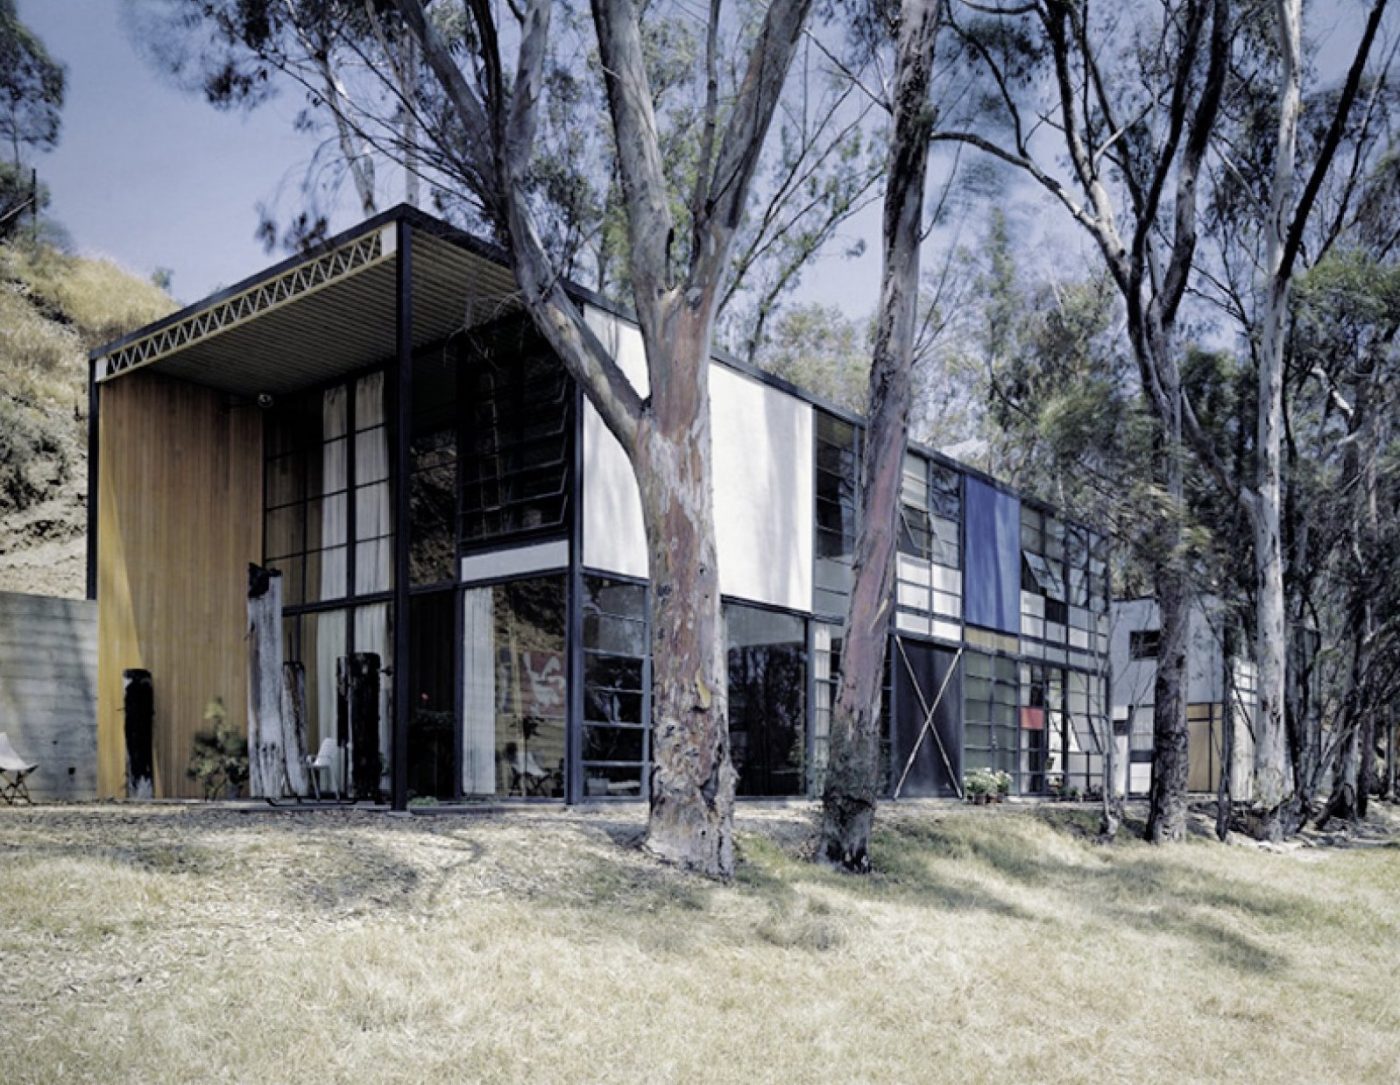 Exterior of Case Study House #8, designed by Charles and Ray Eames